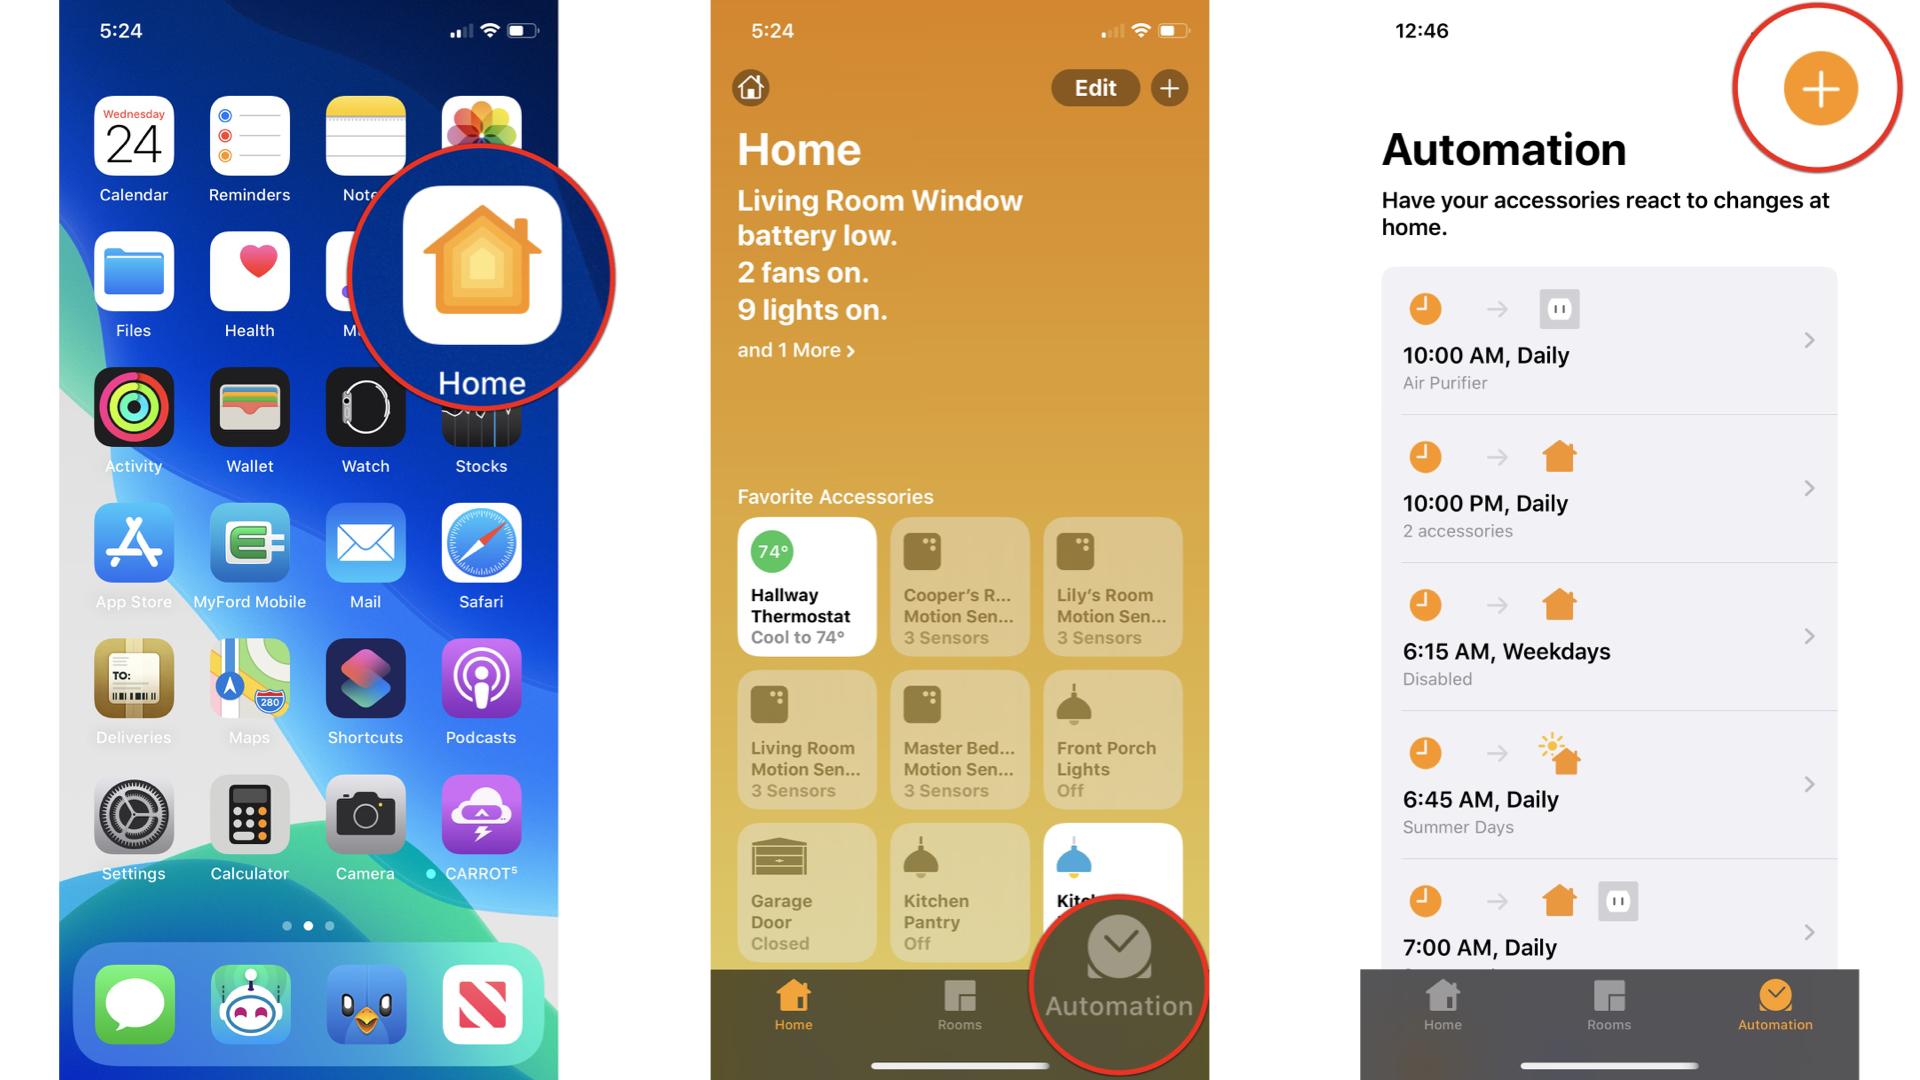 Launch the Home app, tap automations, tap the plus icon